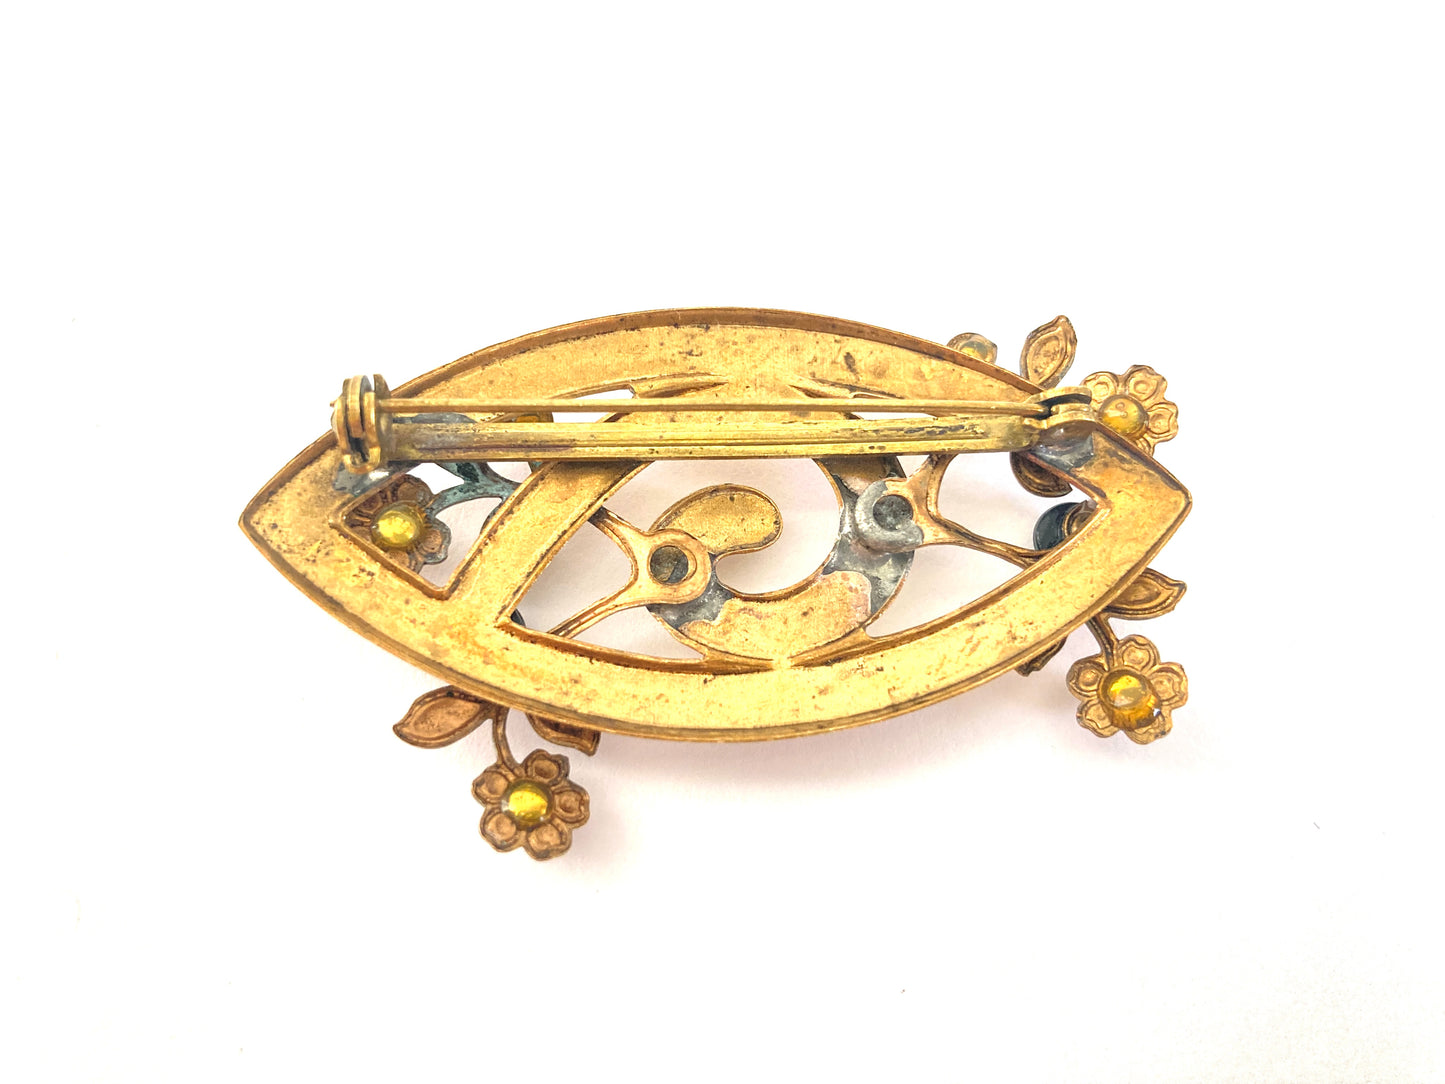 Antique stamped brass brooch with flowers